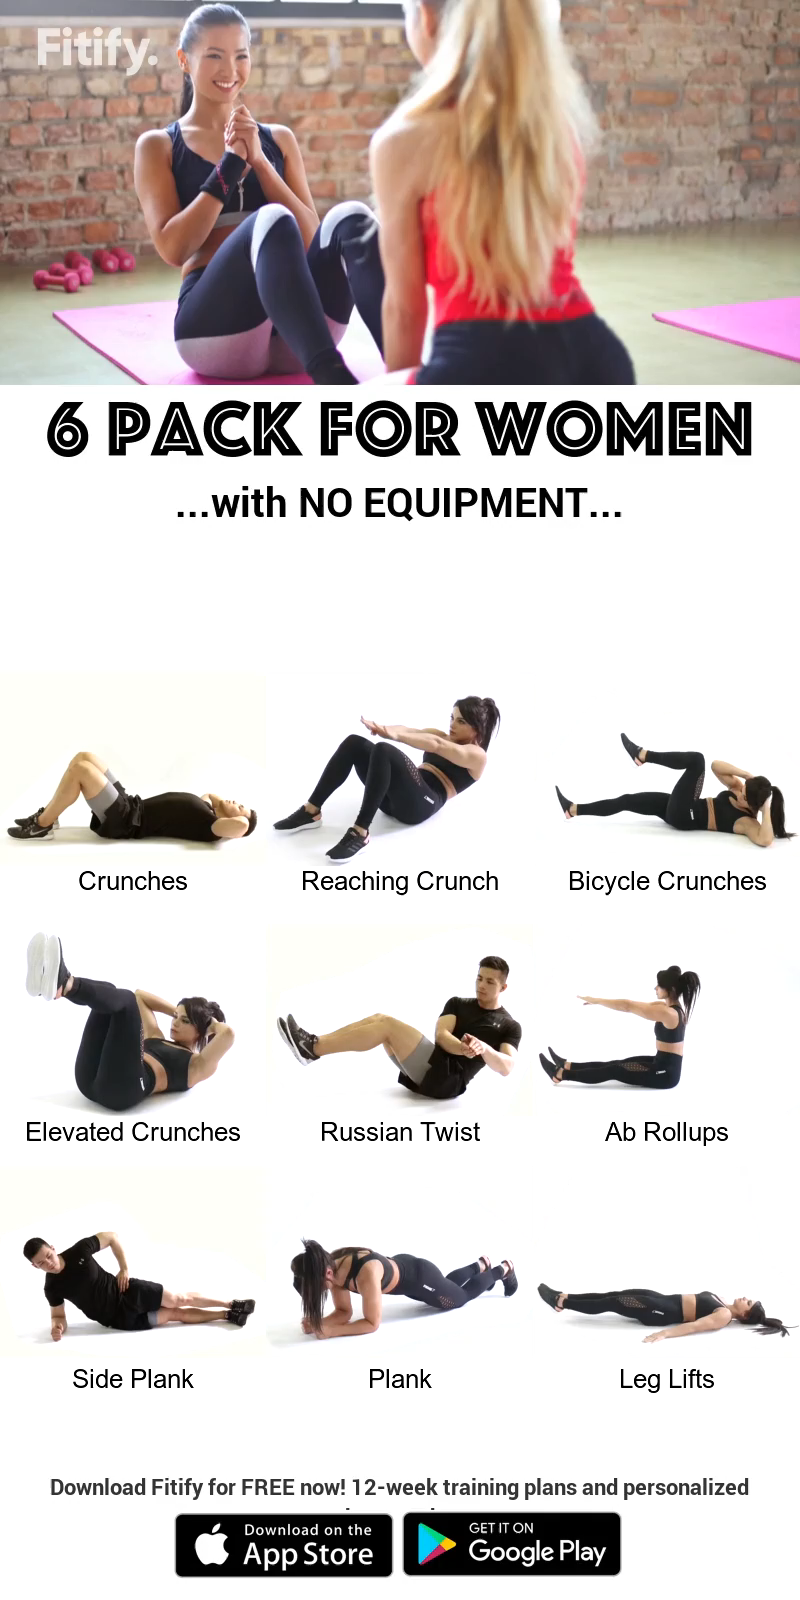 Women 6-Pack using NO Equipment -   17 workouts for flat stomach in 1 week ideas